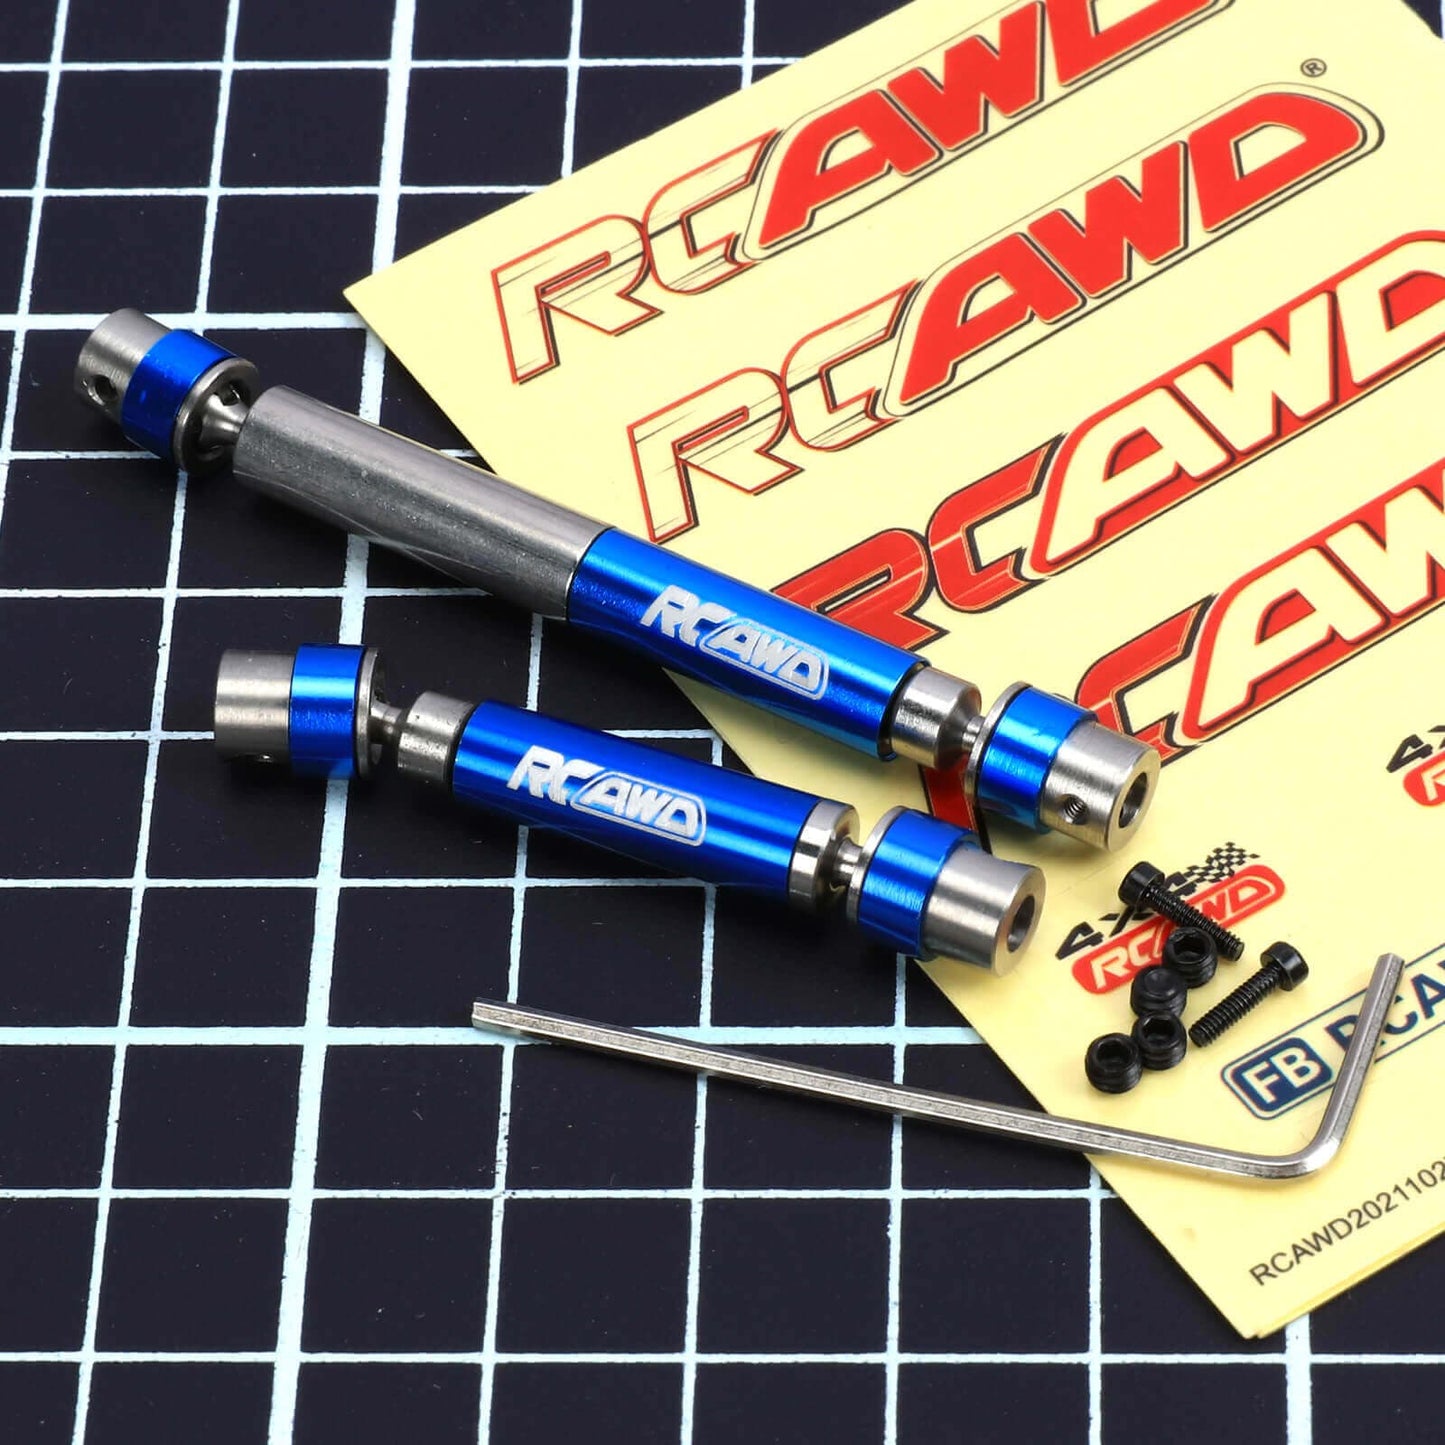 RCAWD HobbyPlus CR18 Upgrades Stainless Steel Centre Driveshafts 240305 - RCAWD